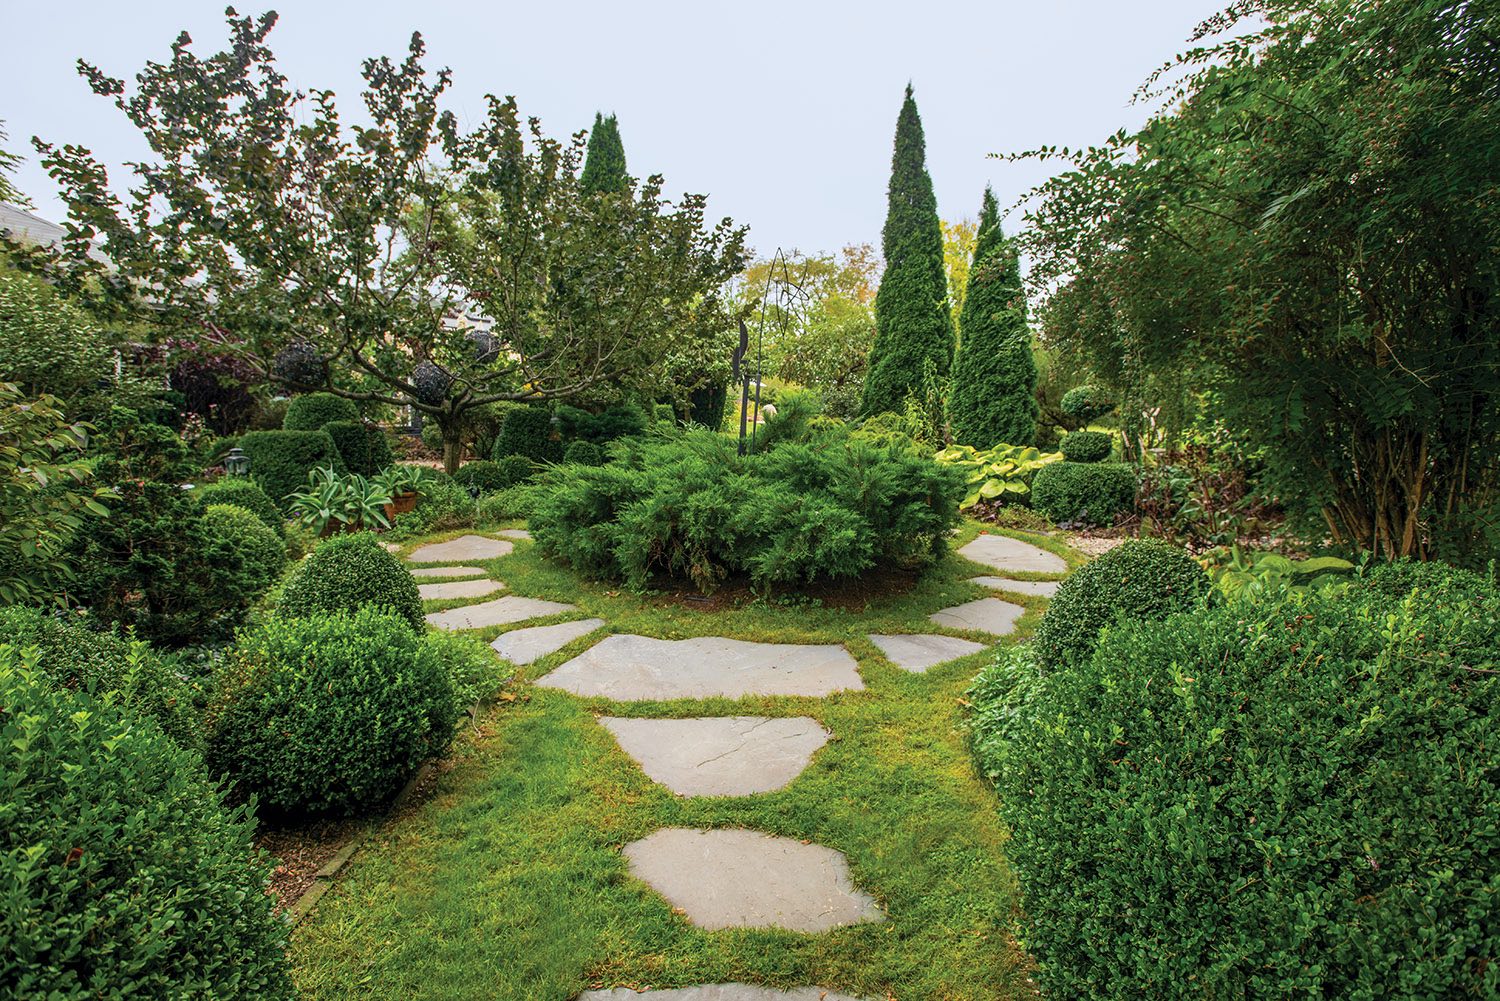 Garden pathway surrounded by grass and evergreen plantings.